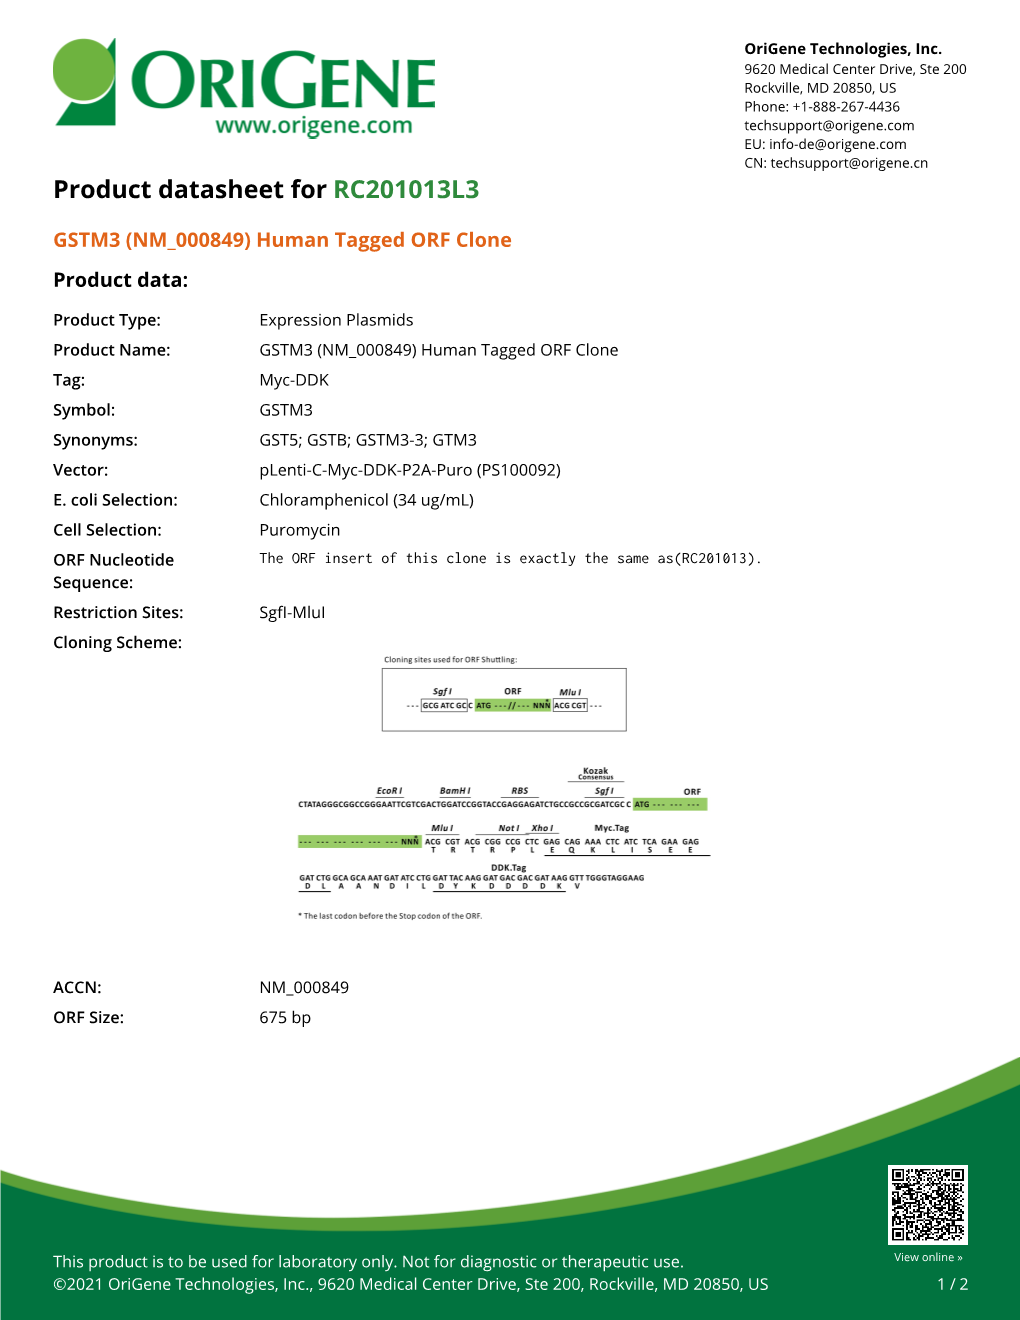 GSTM3 (NM 000849) Human Tagged ORF Clone Product Data